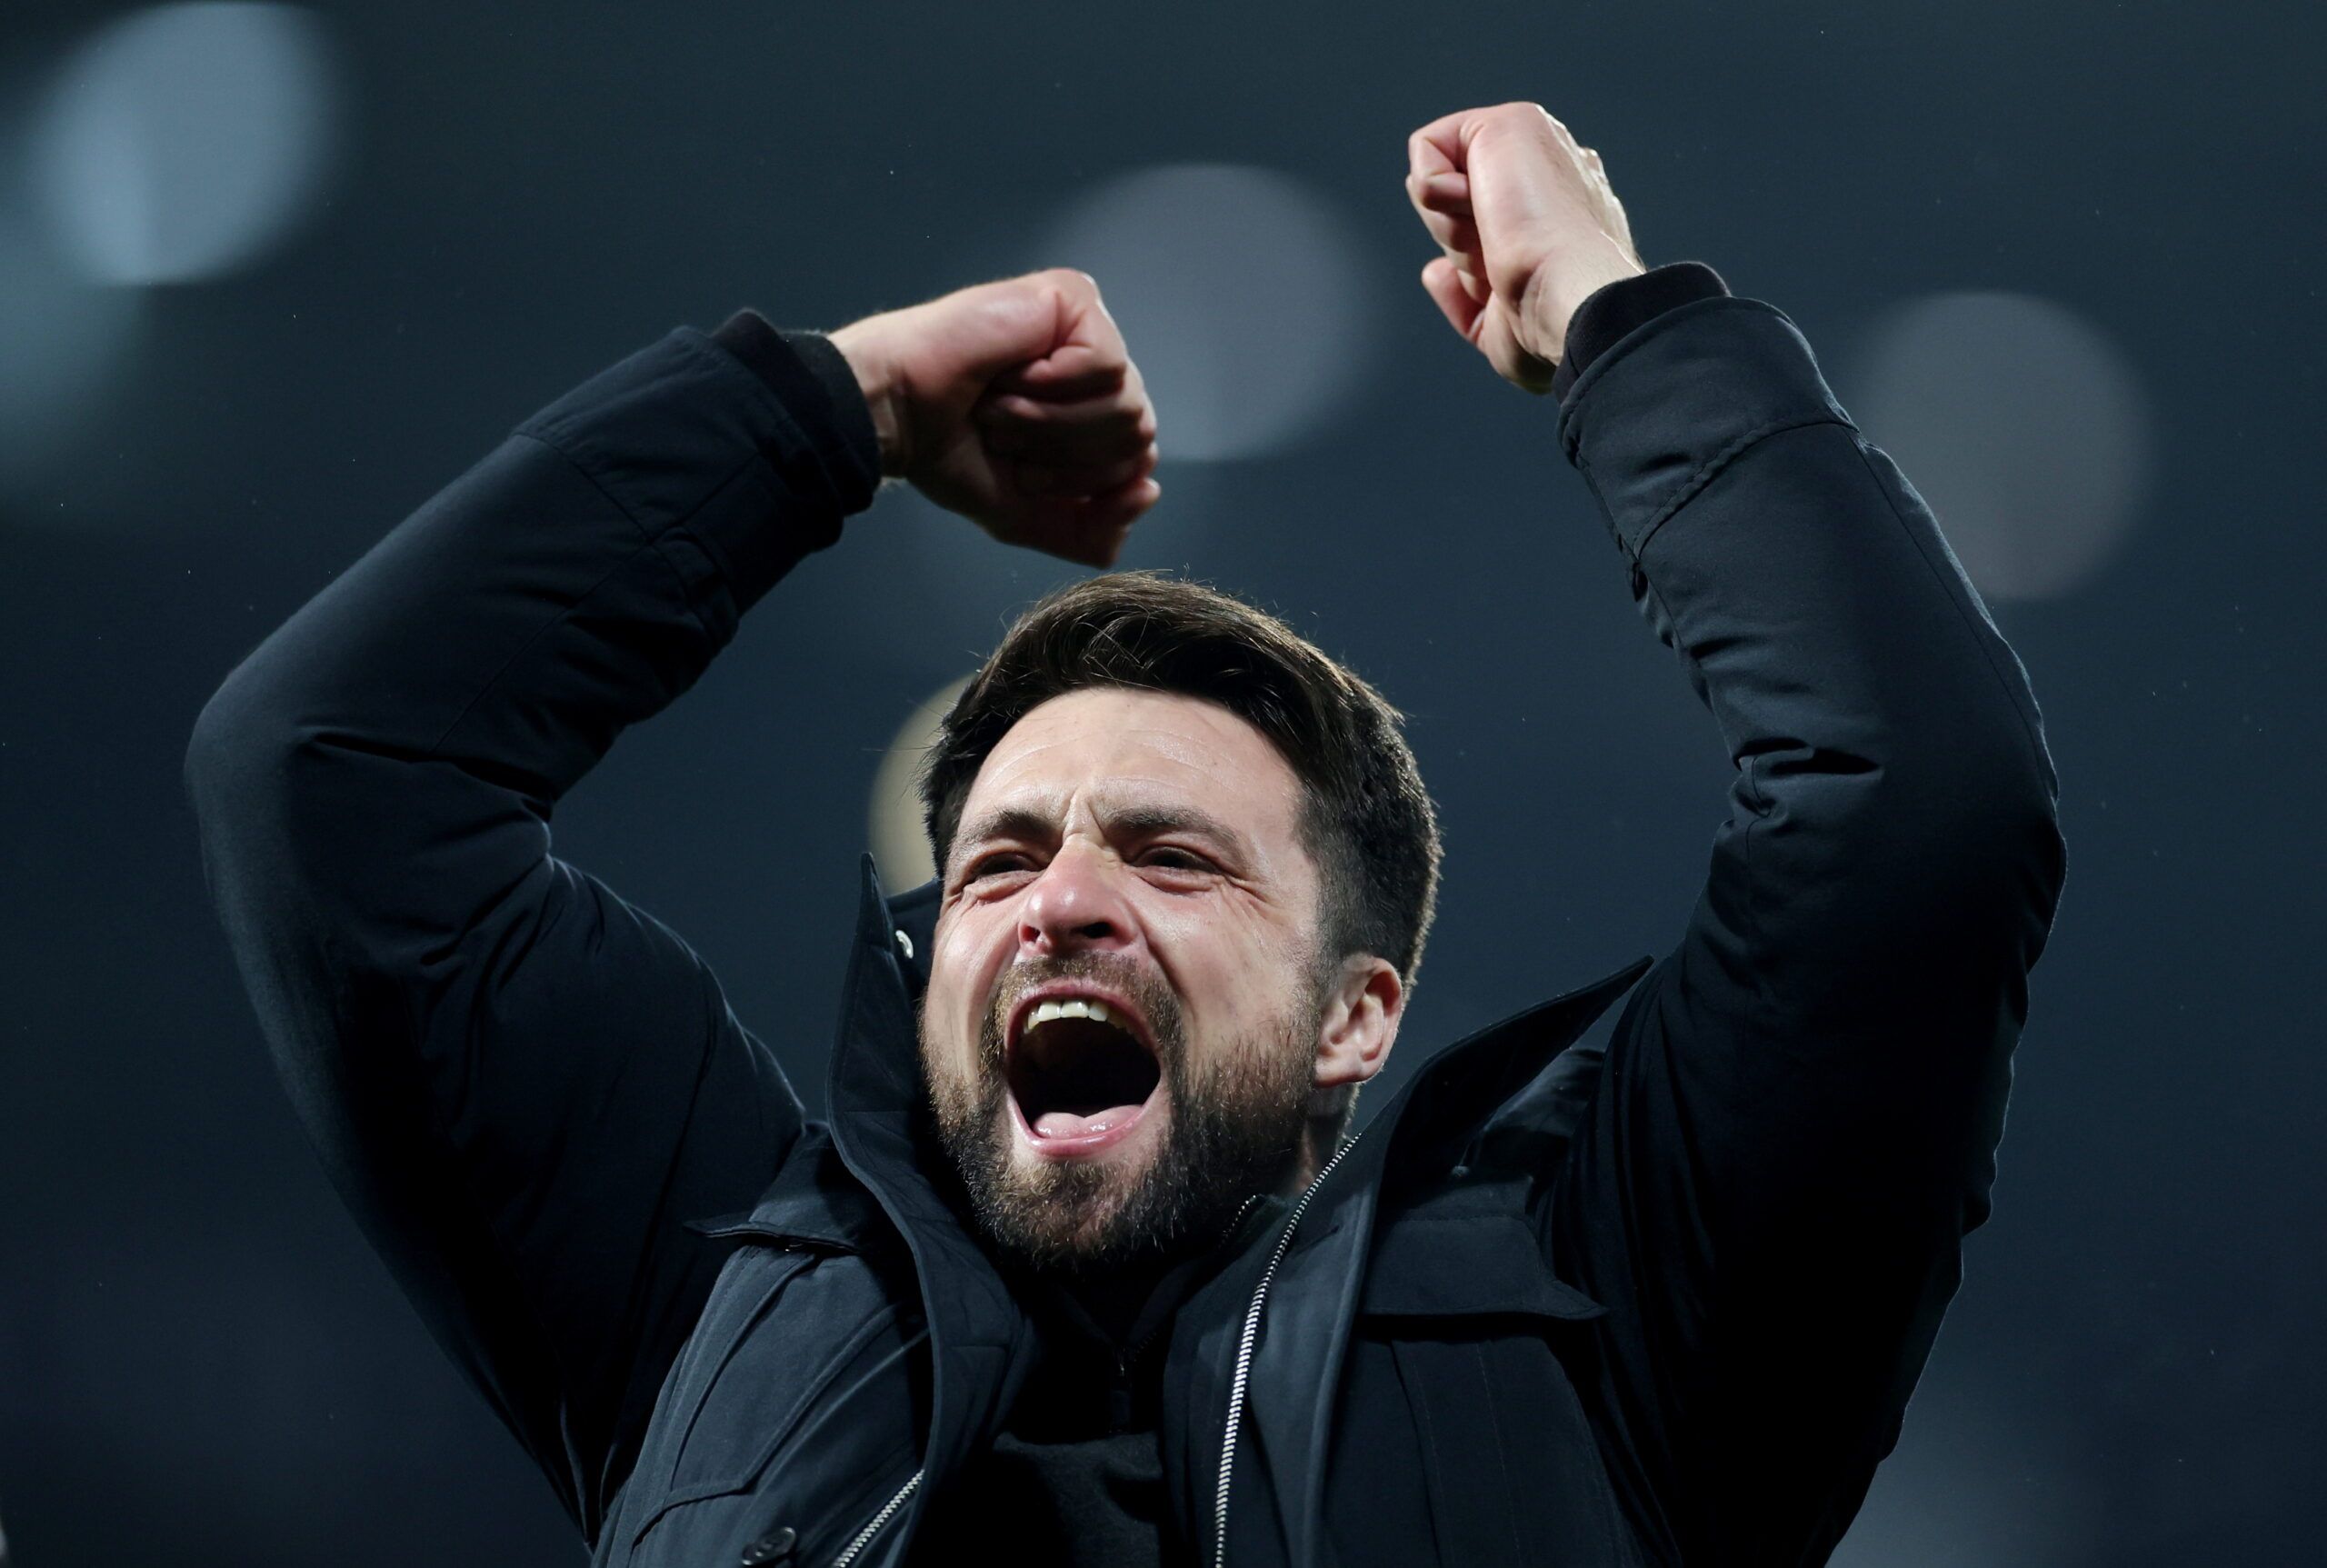 Soccer Football - Championship -  West Bromwich Albion v Swansea City - The Hawthorns, West Bromwich, Britain - February 28, 2022 Swansea City manager Russell Martin celebrates after the match  Action Images/Carl Recine  EDITORIAL USE ONLY. No use with unauthorized audio, video, data, fixture lists, club/league logos or 